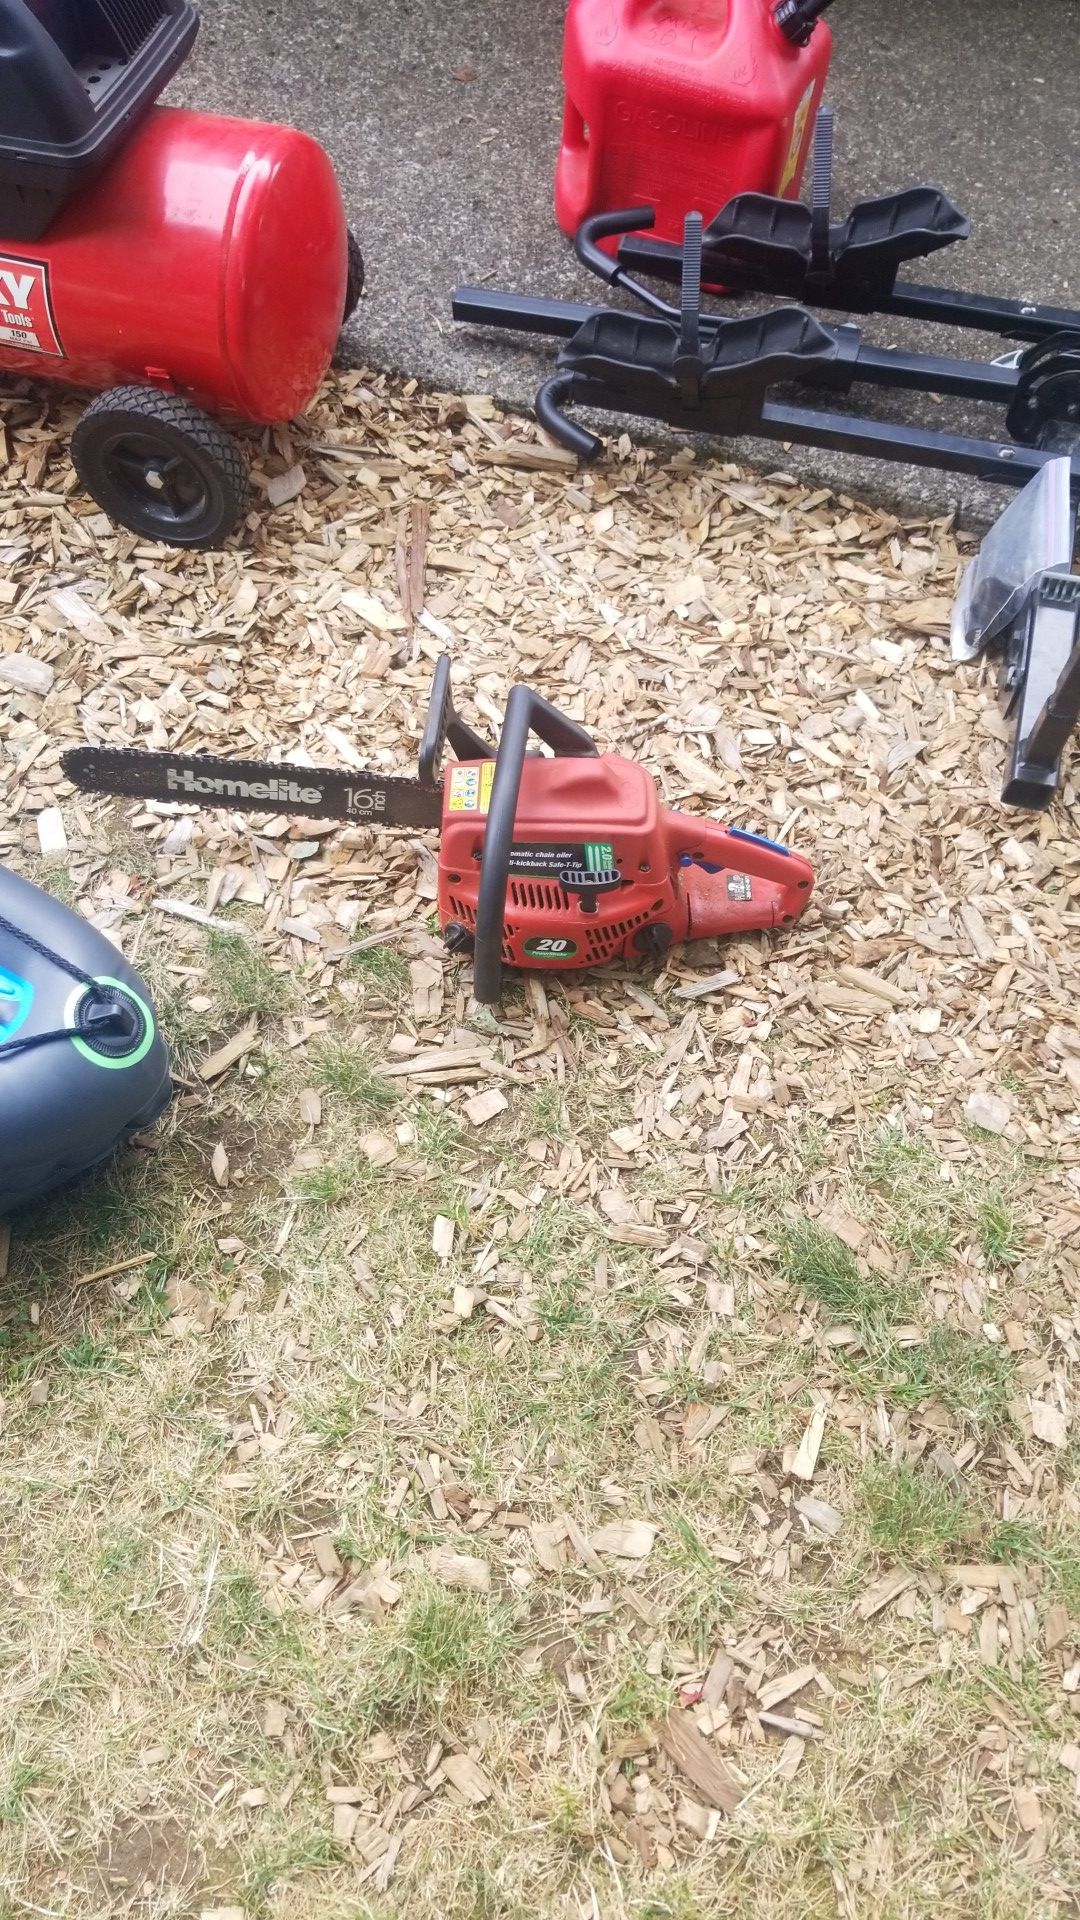 Homelight gas chainsaw